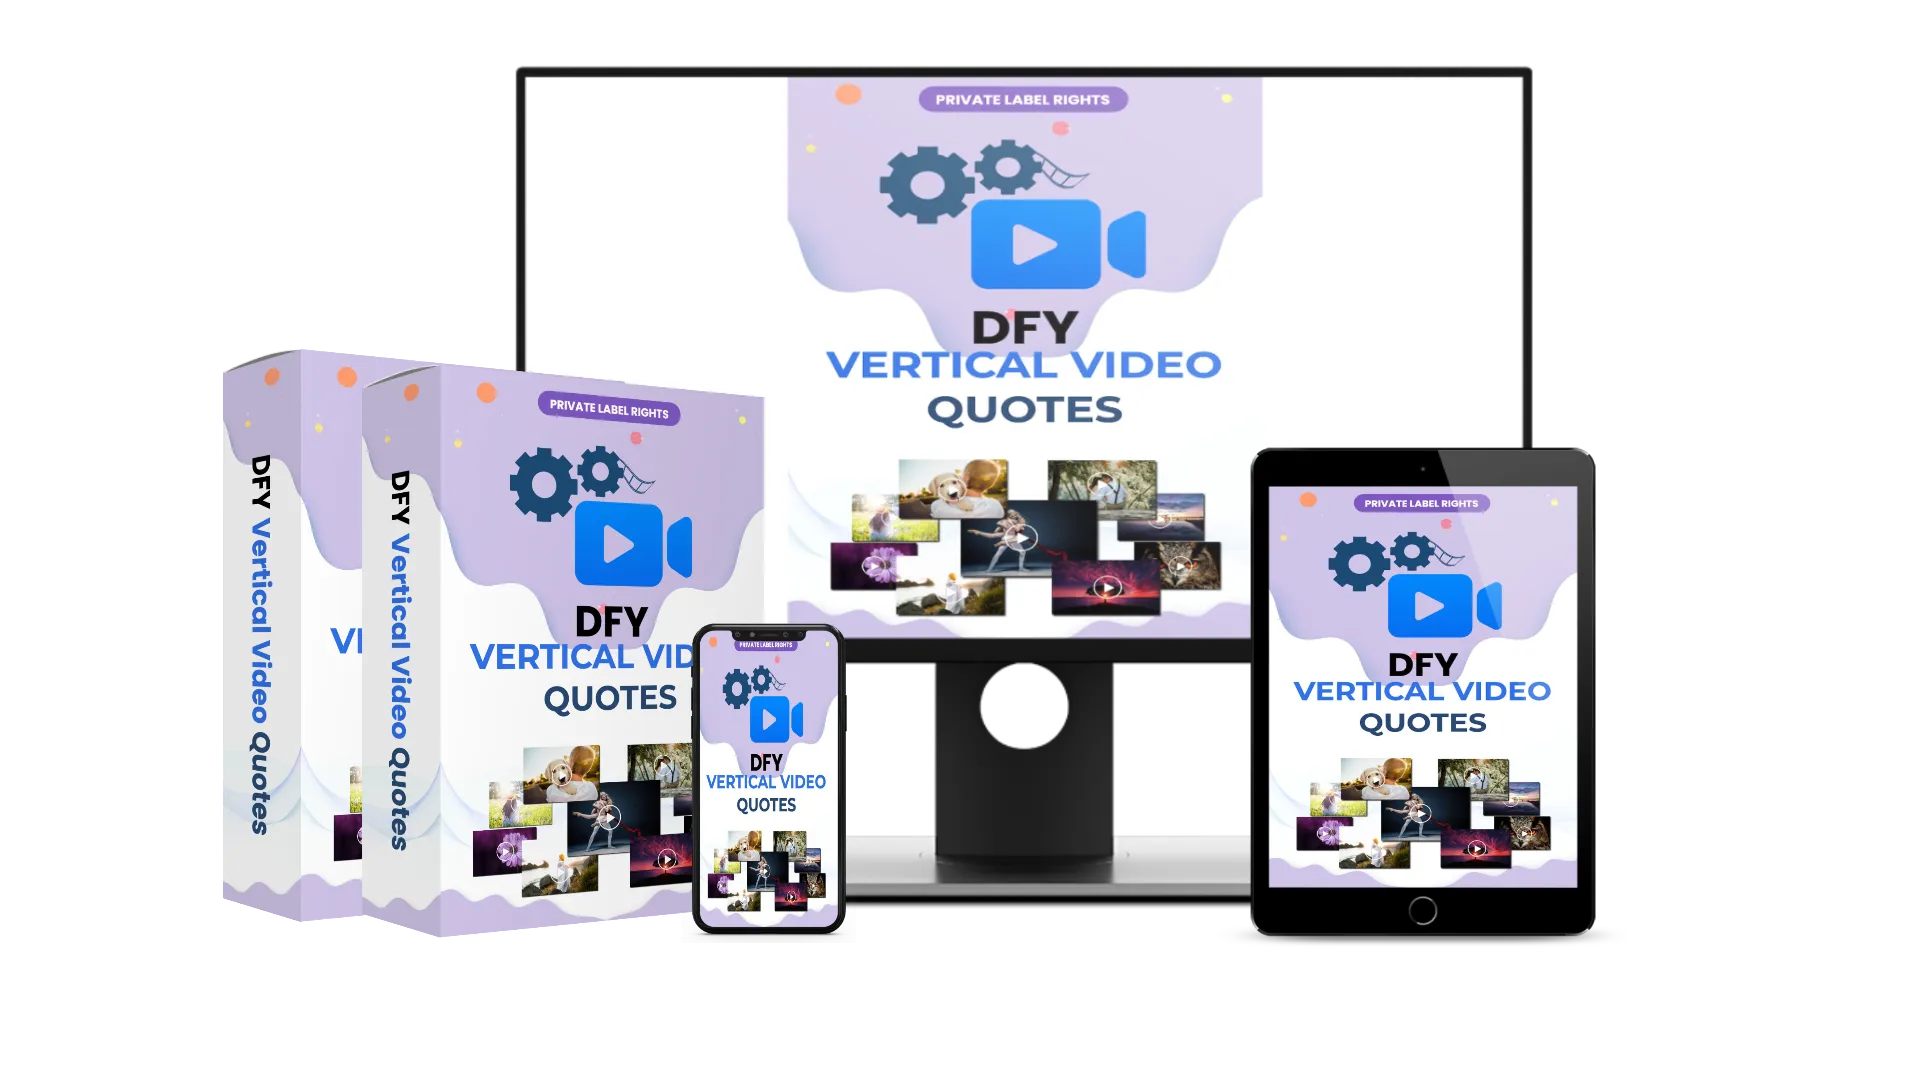 DFY Vertical Video Quotes